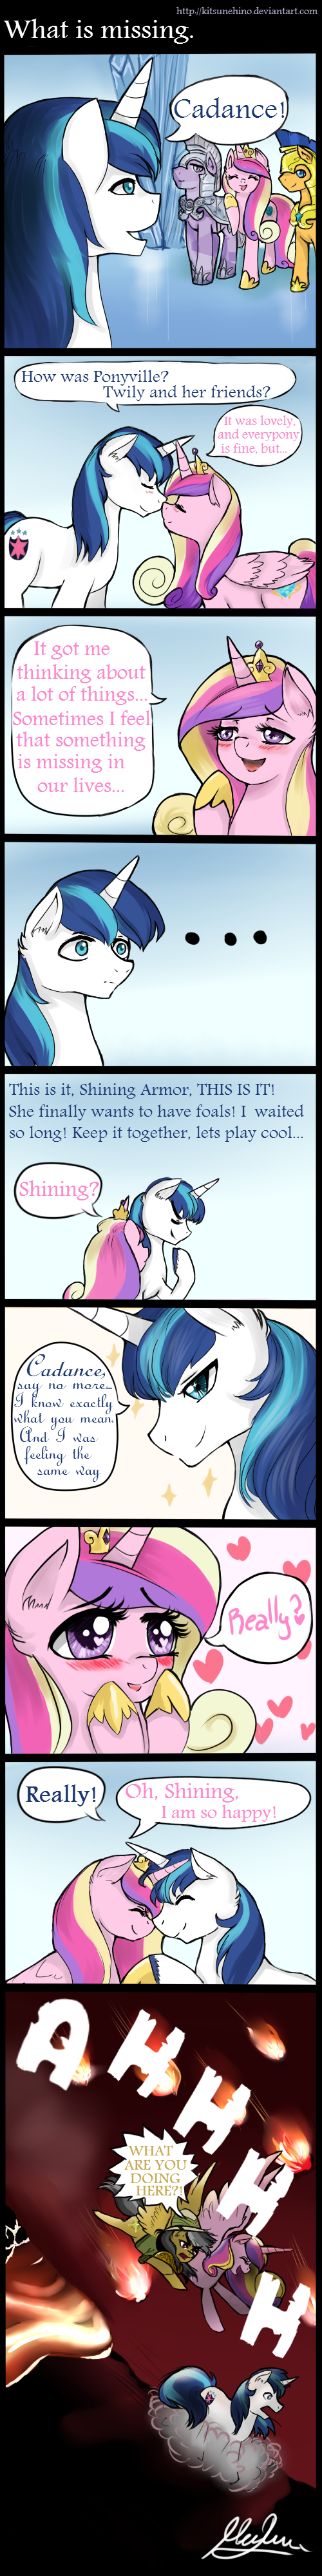 [Obrázek: what_is_missing__comic__by_kitsunehino-d75mlc8.png]